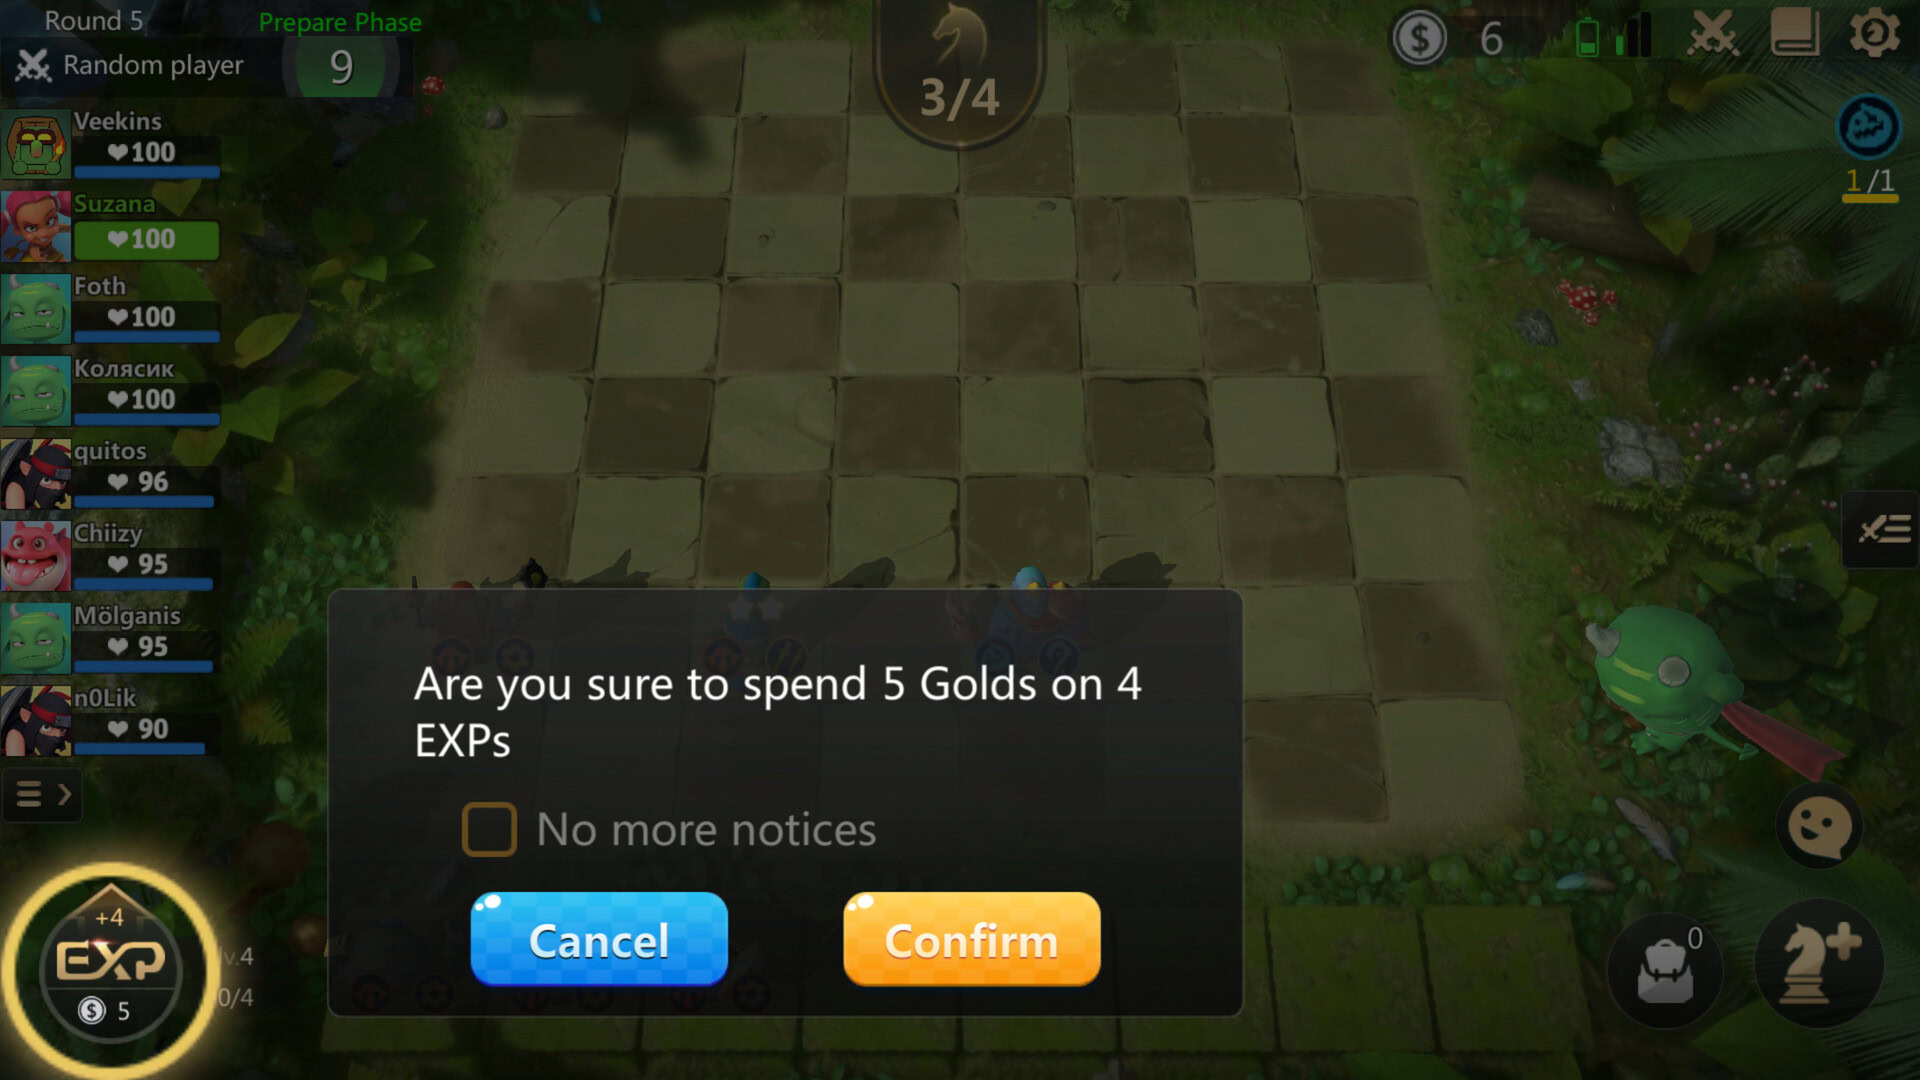 Auto Chess beginner's guide: From novice to grandmaster - Android Authority